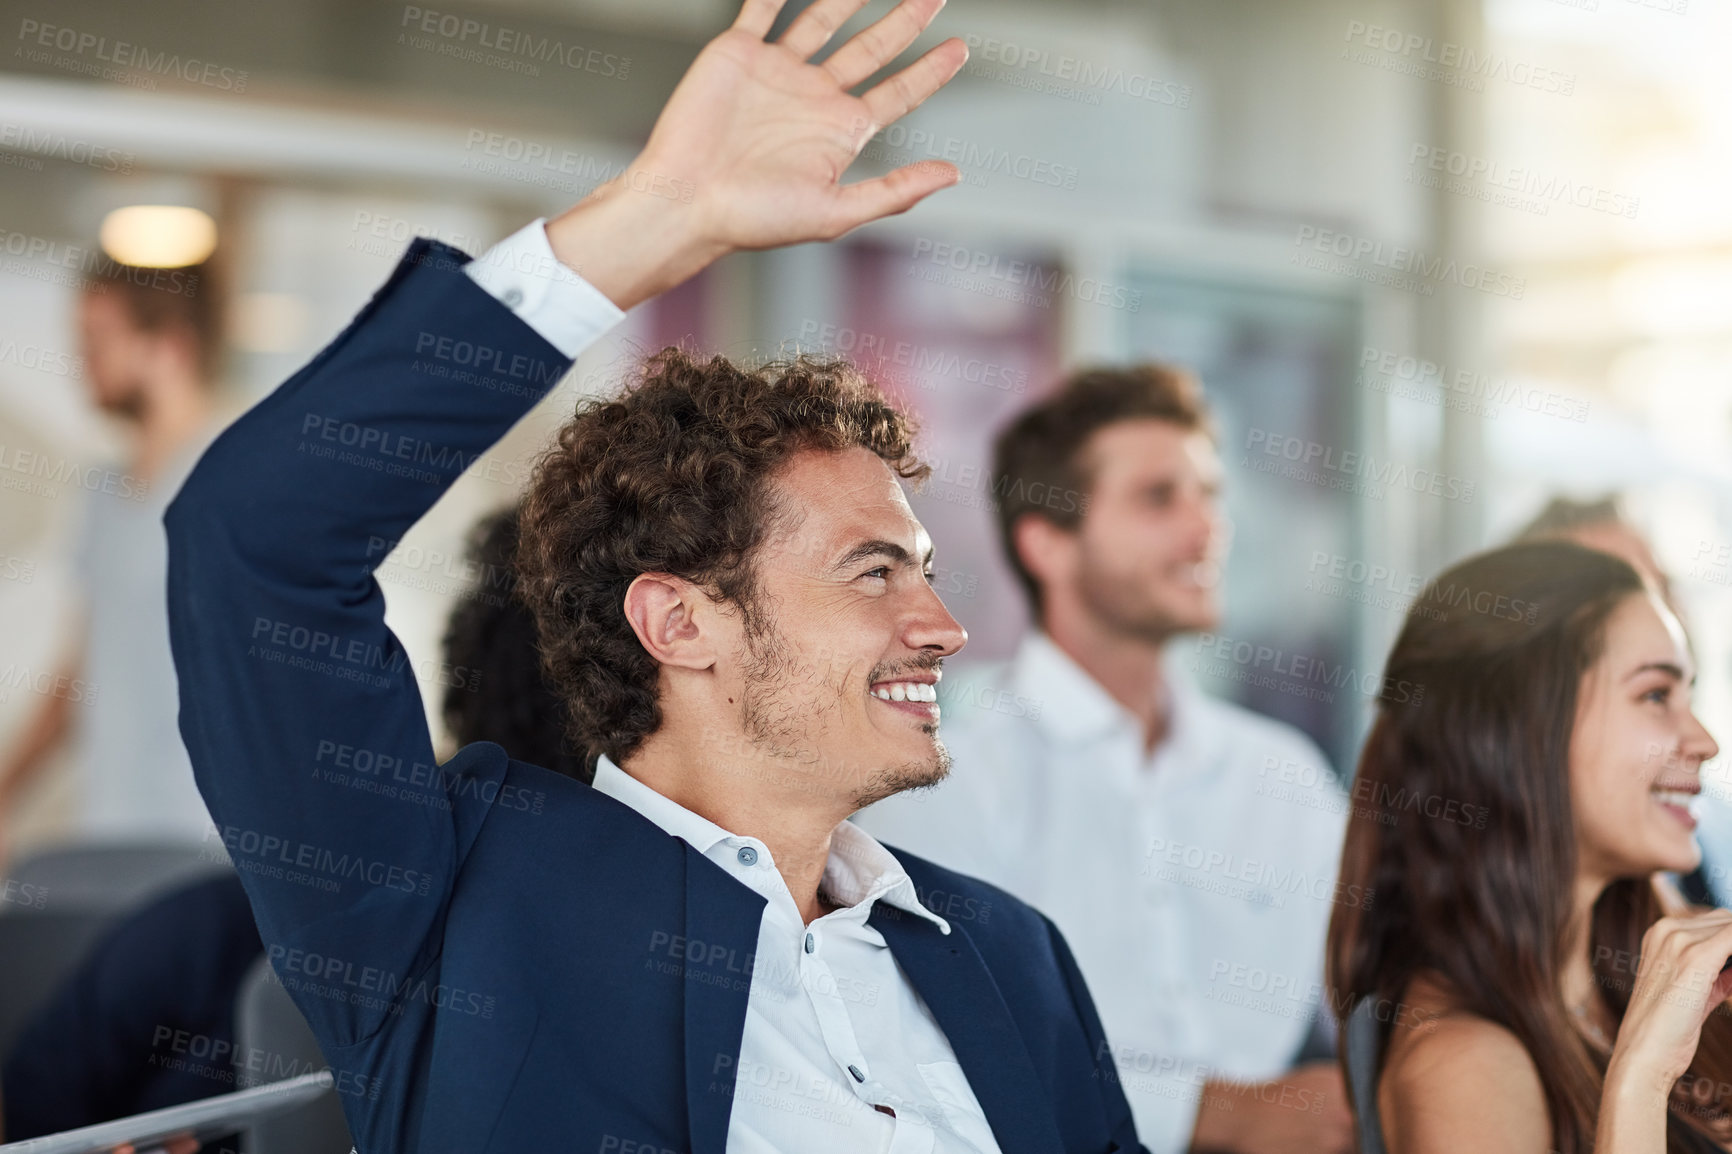 Buy stock photo Cropped shot of a handsome young businessman raising his hand during a seminar